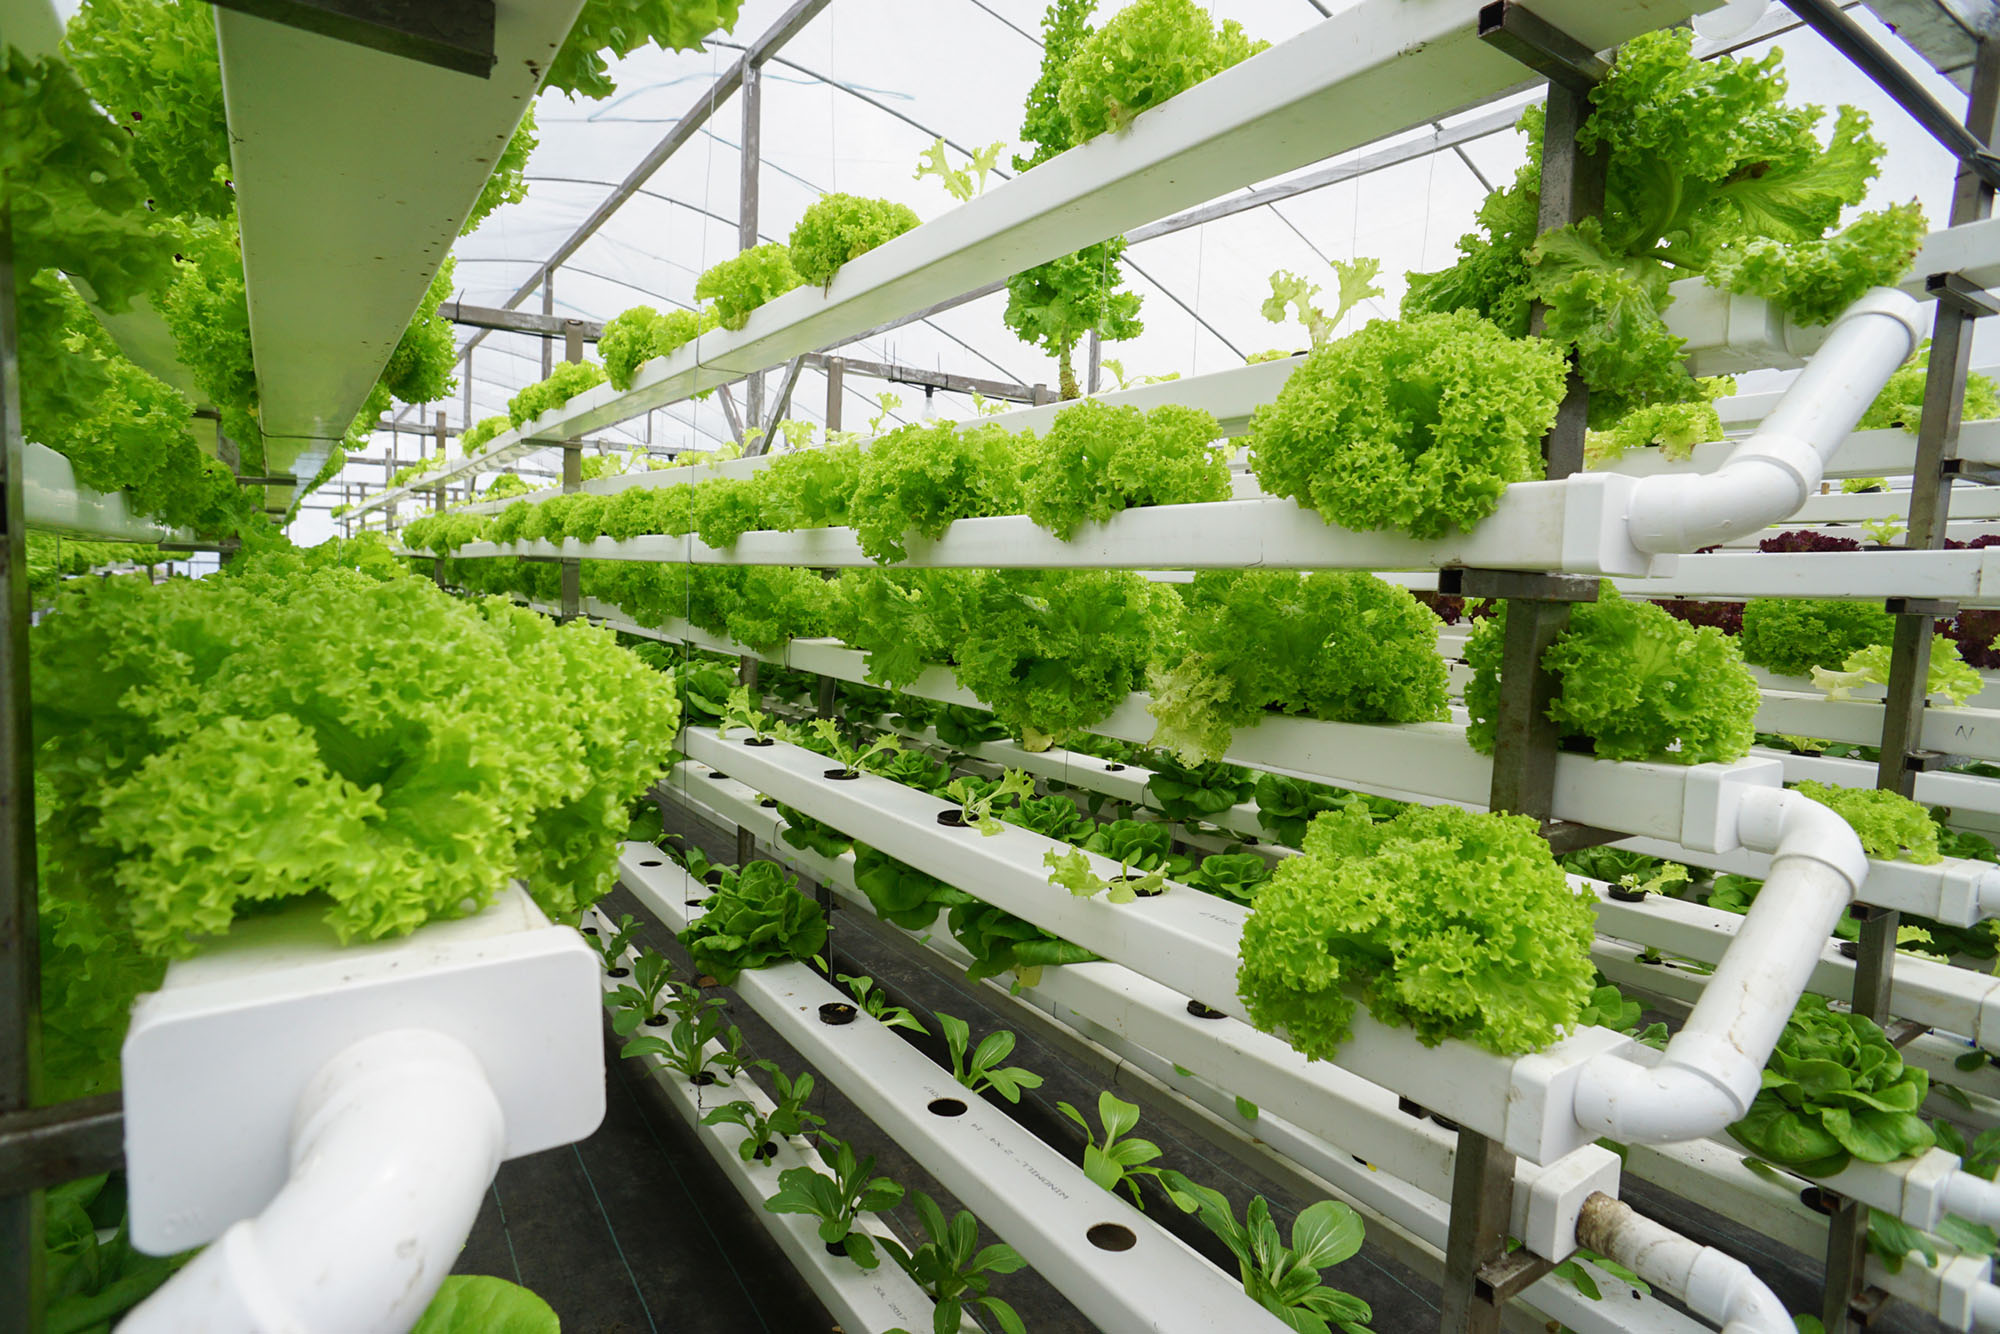 Featured image for “Vertical Farming – Aquaponics”